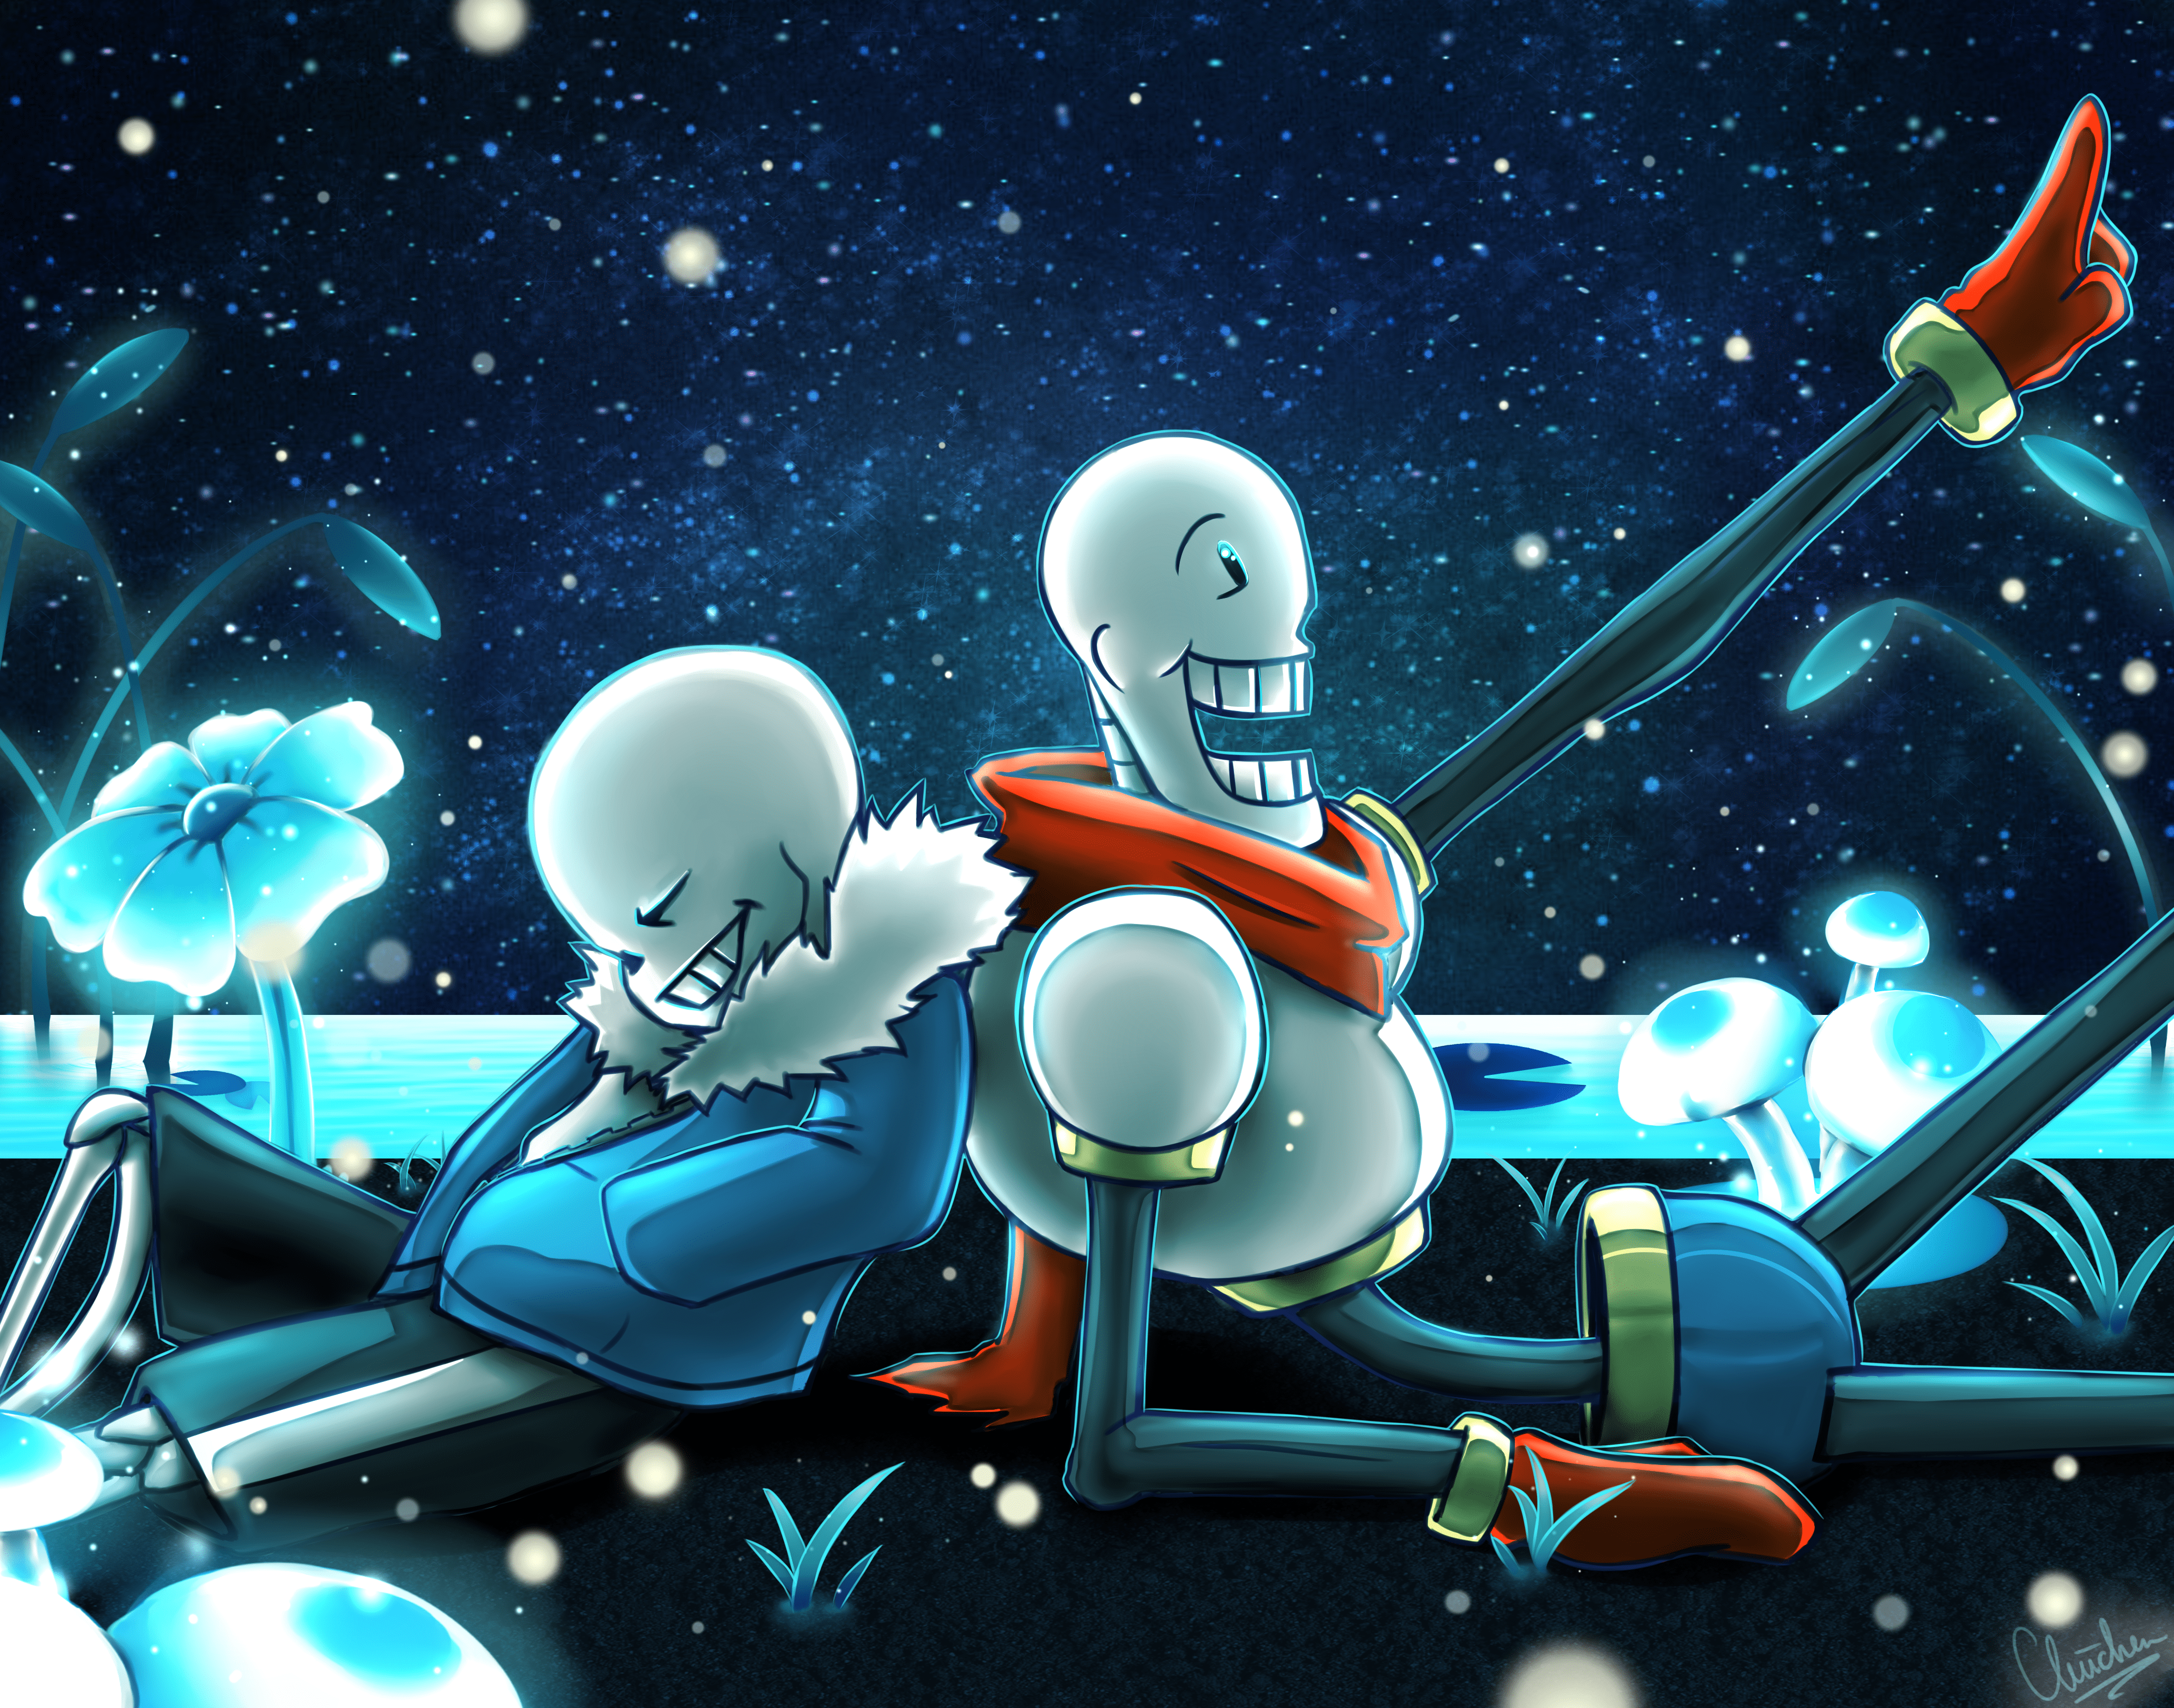 Sans And Papyrus Wallpapers Top Free Sans And Papyrus Backgrounds Wallpaperaccess